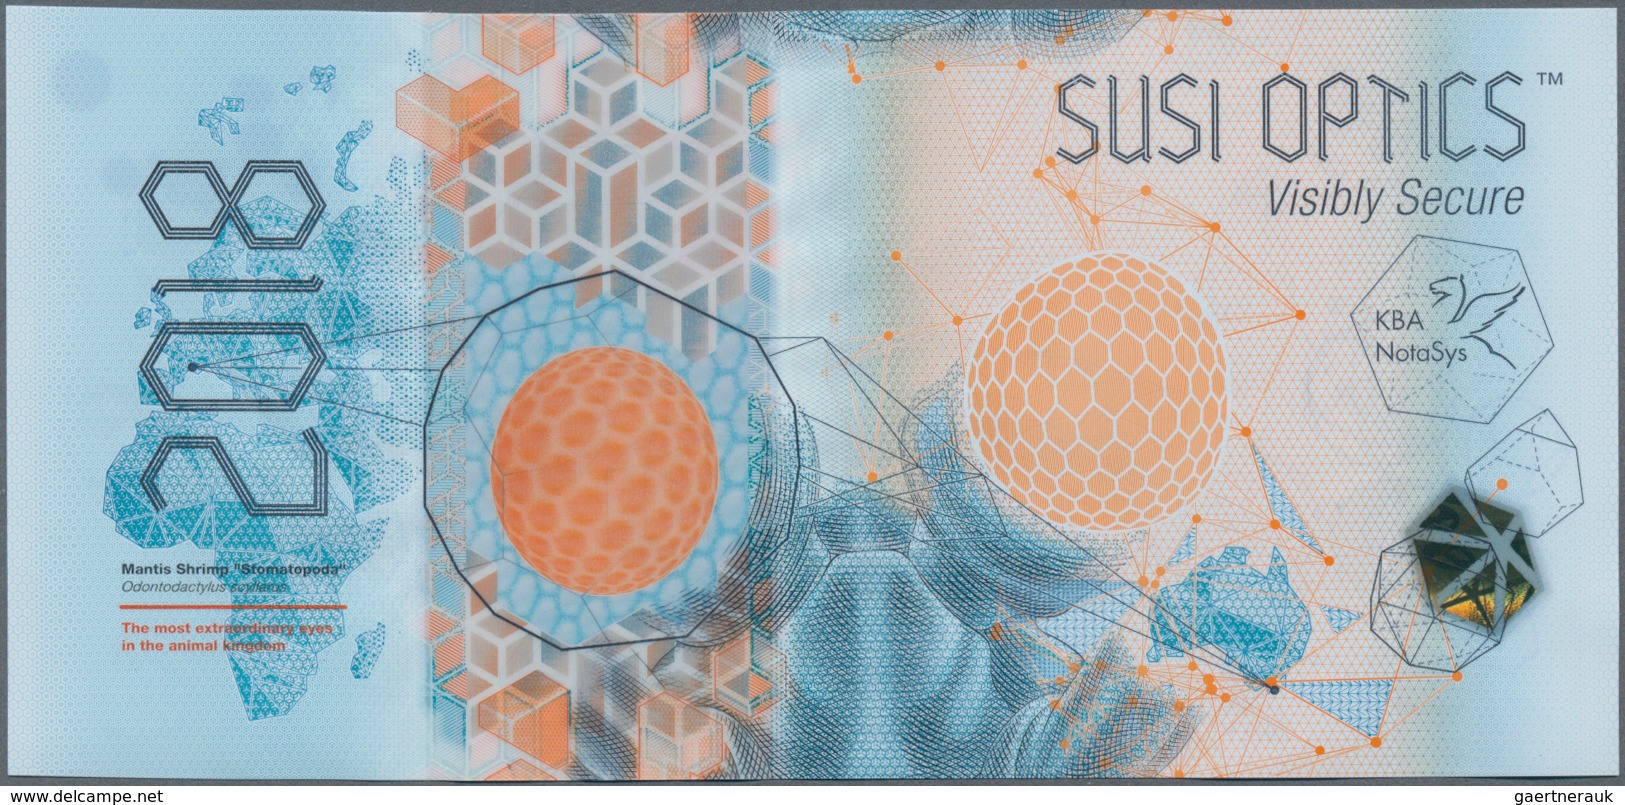 Testbanknoten: 2018 Polymer Test Note “Susi Optics 2018” By KBA-Notasys And Some Of The Industry's L - Ficción & Especímenes